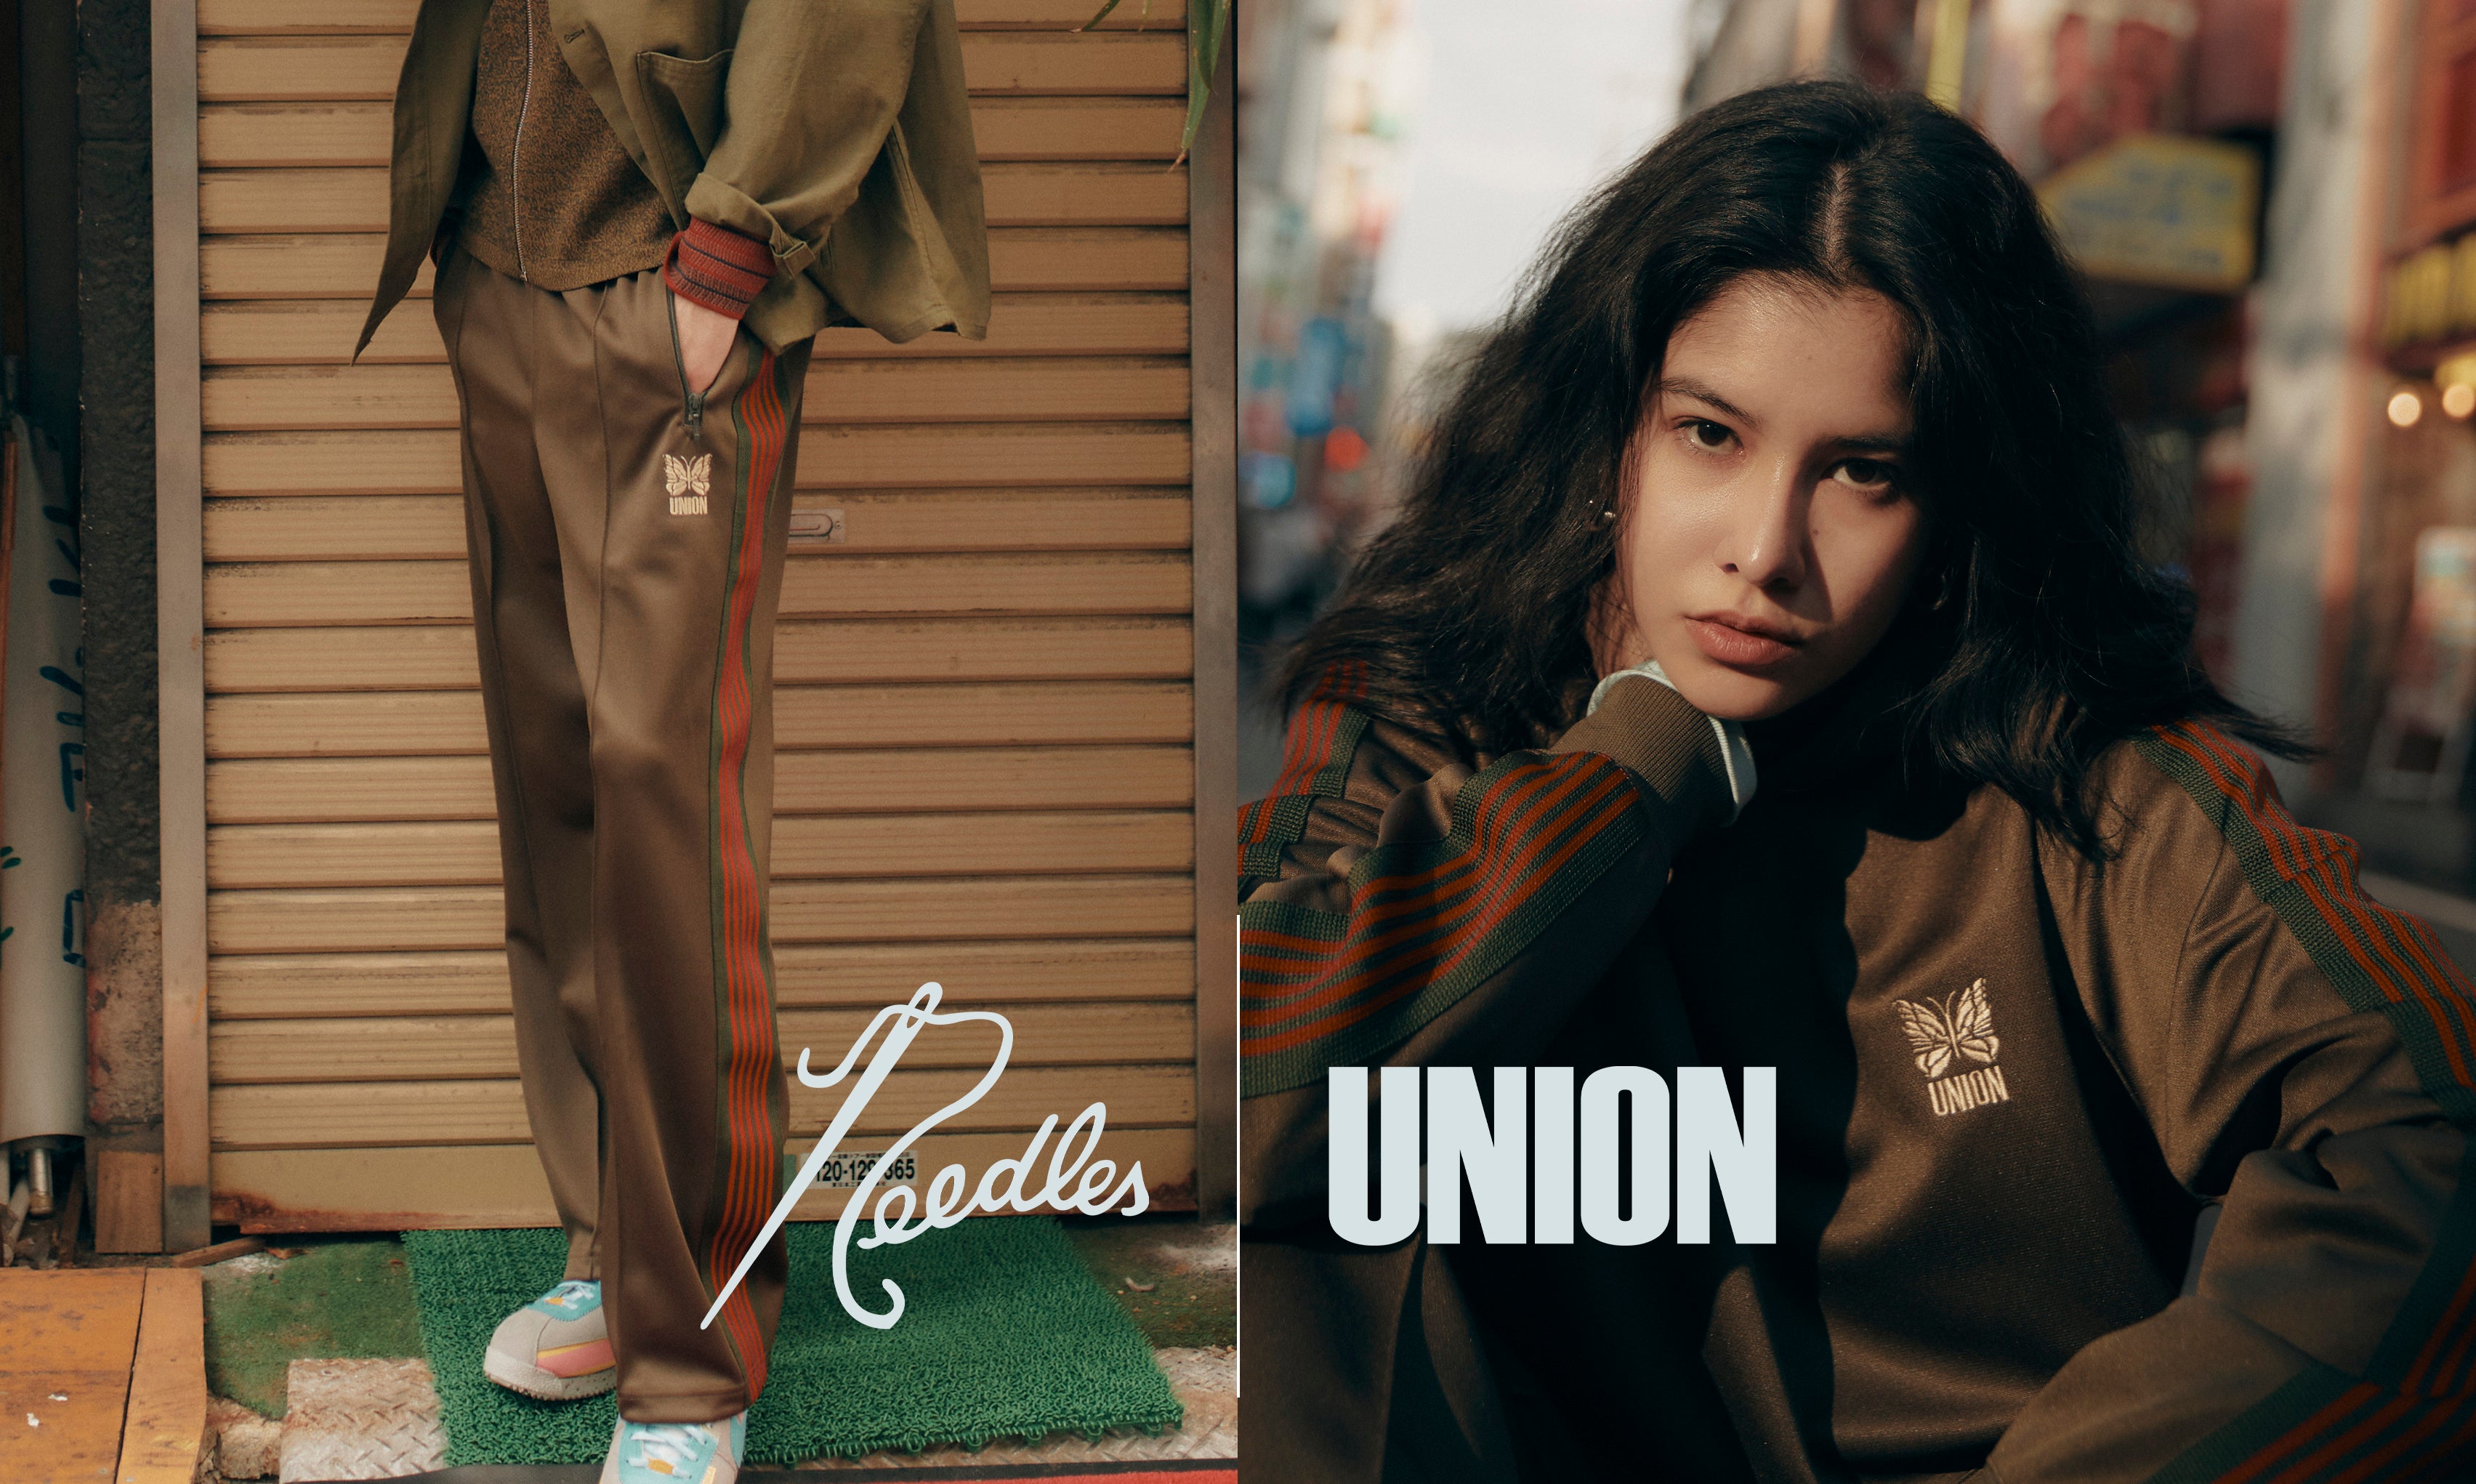 UNION MEMBERS EXCLUSIVE UNION x NEEDLES TRACK HOODIE & TRACK PANT